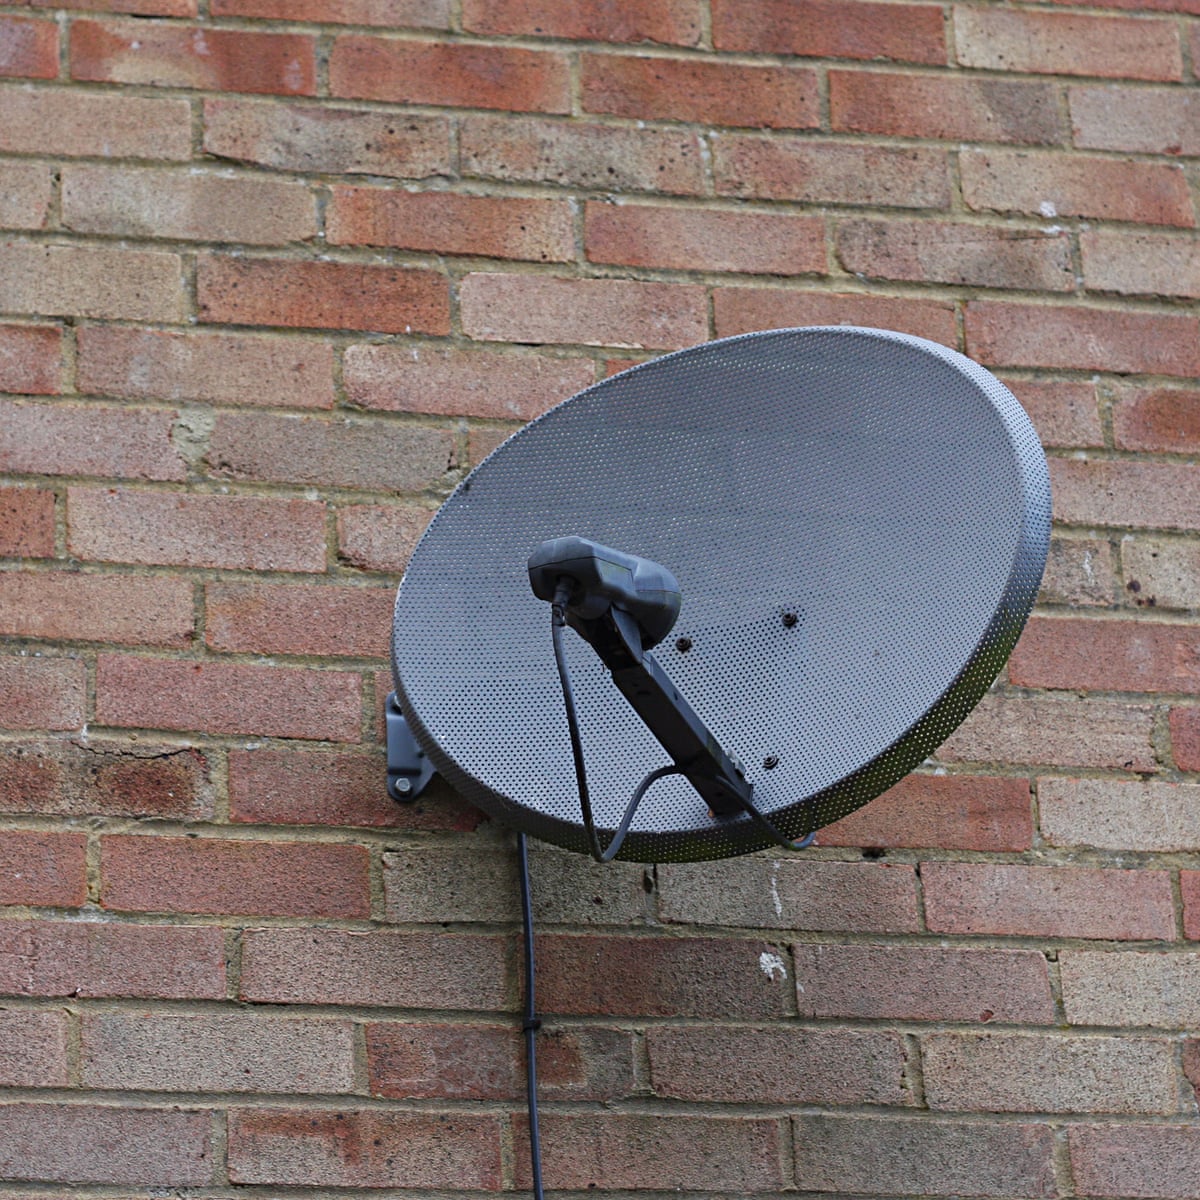 Why do satellite dishes have two cables?